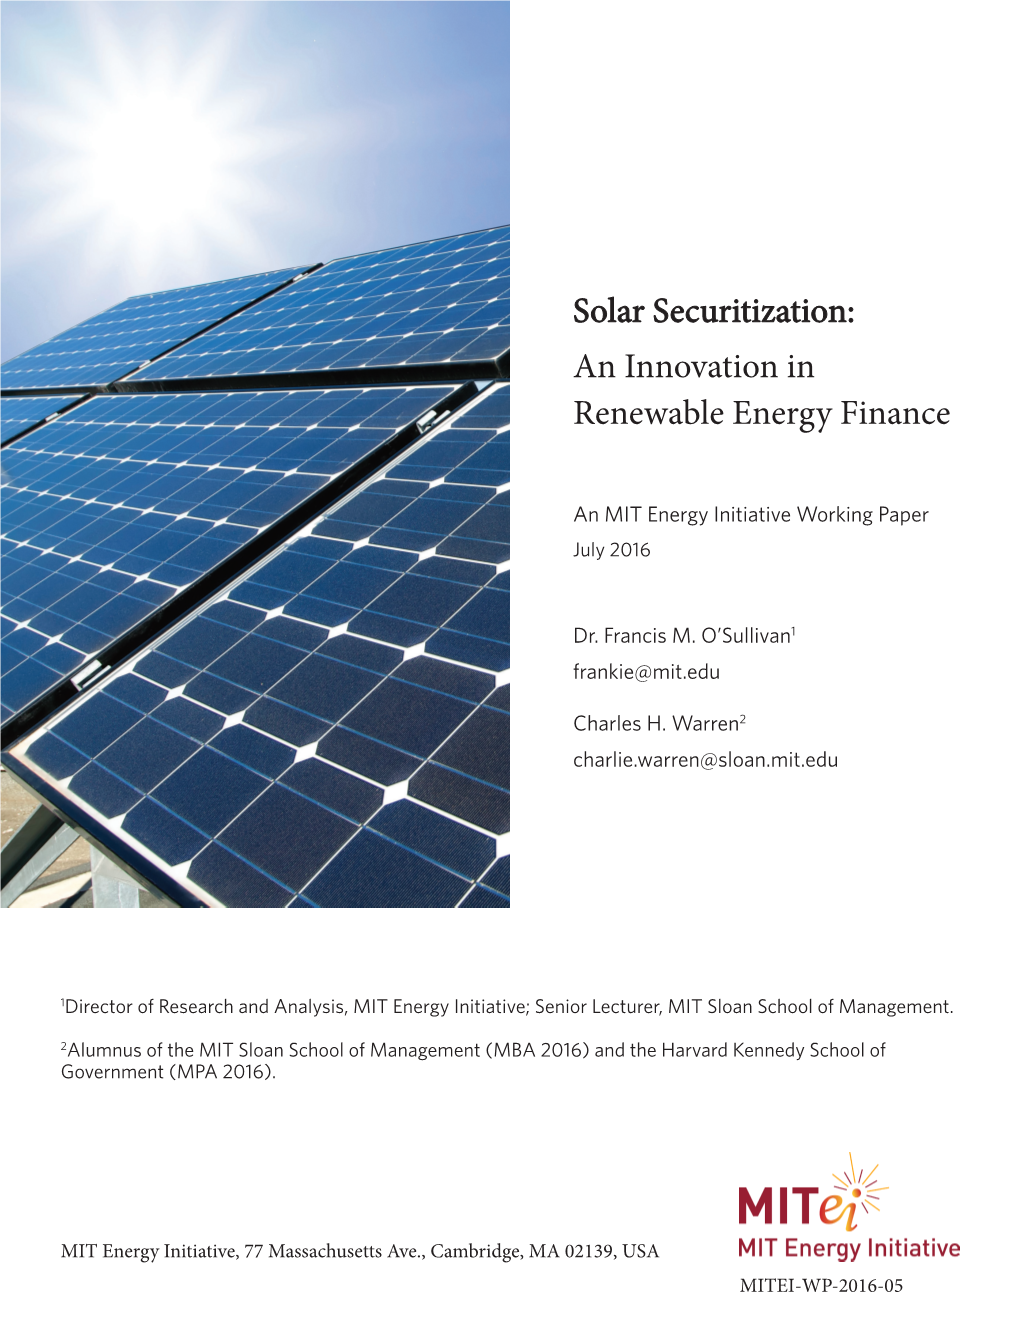 Solar Securitization: an Innovation in Renewable Energy Finance